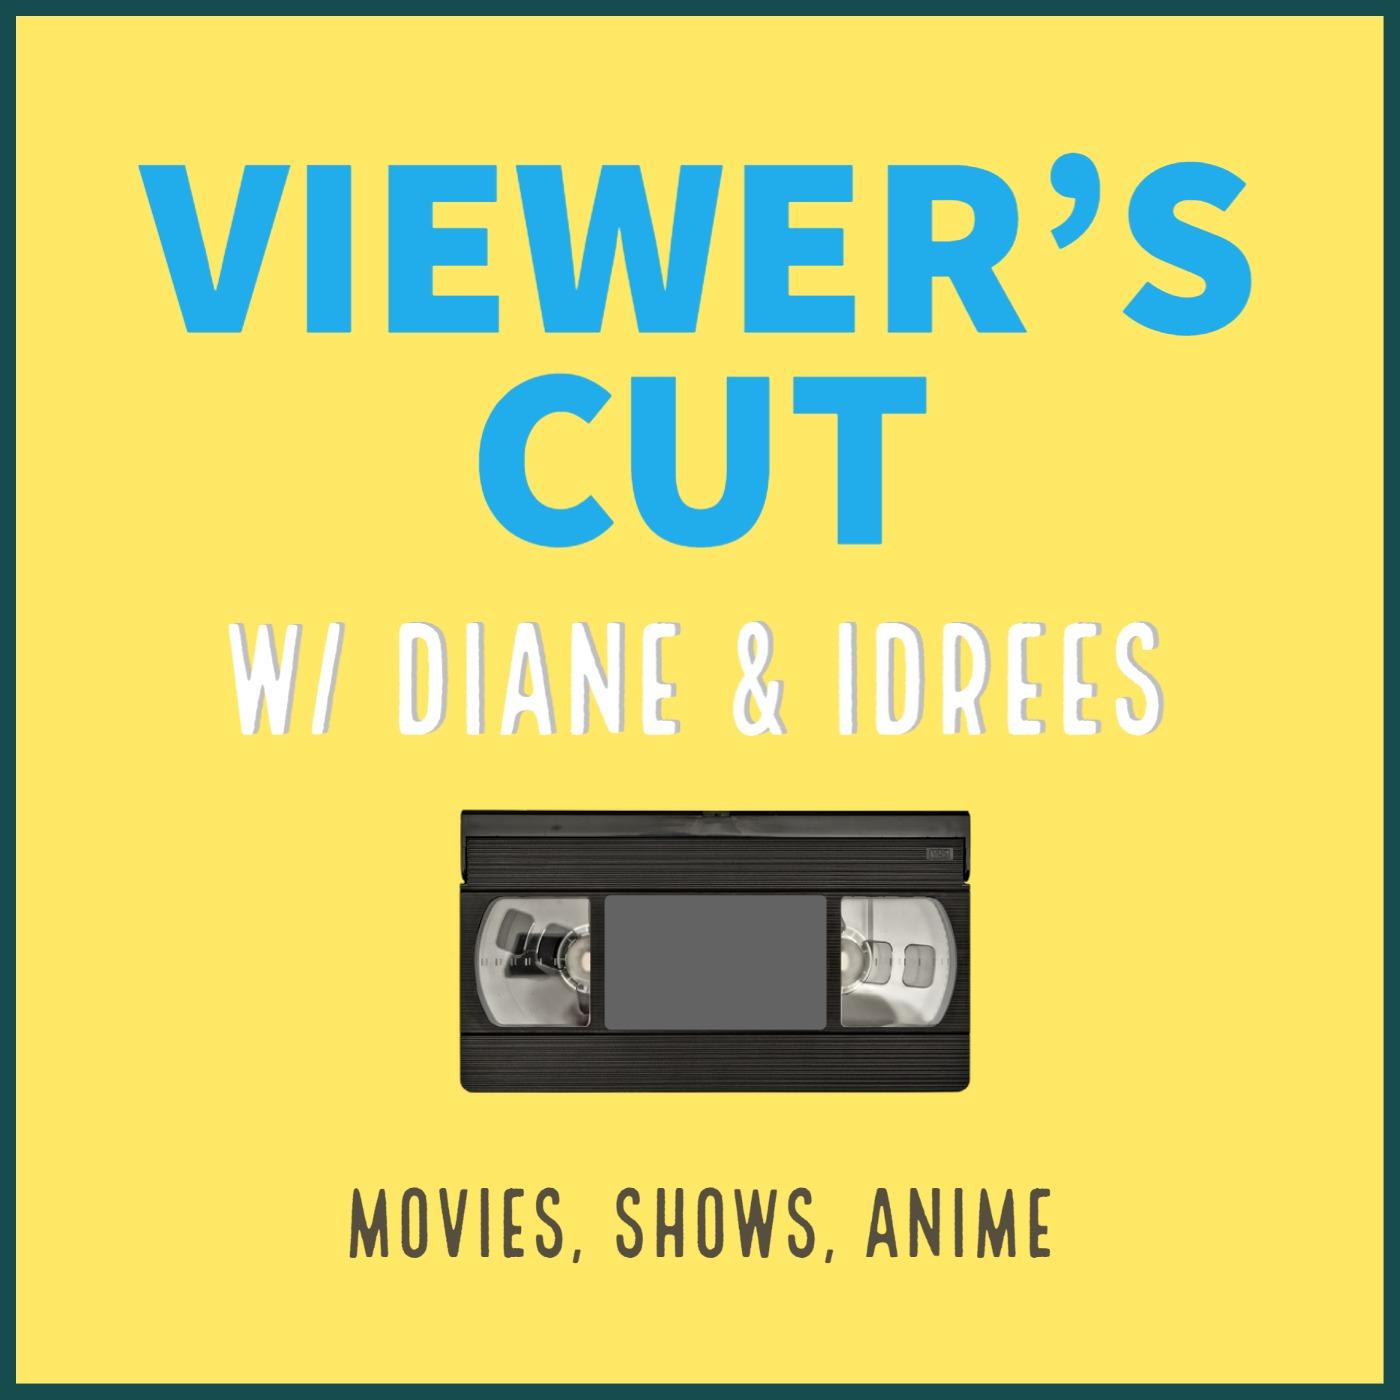 Viewer's Cut with Diane & Idrees